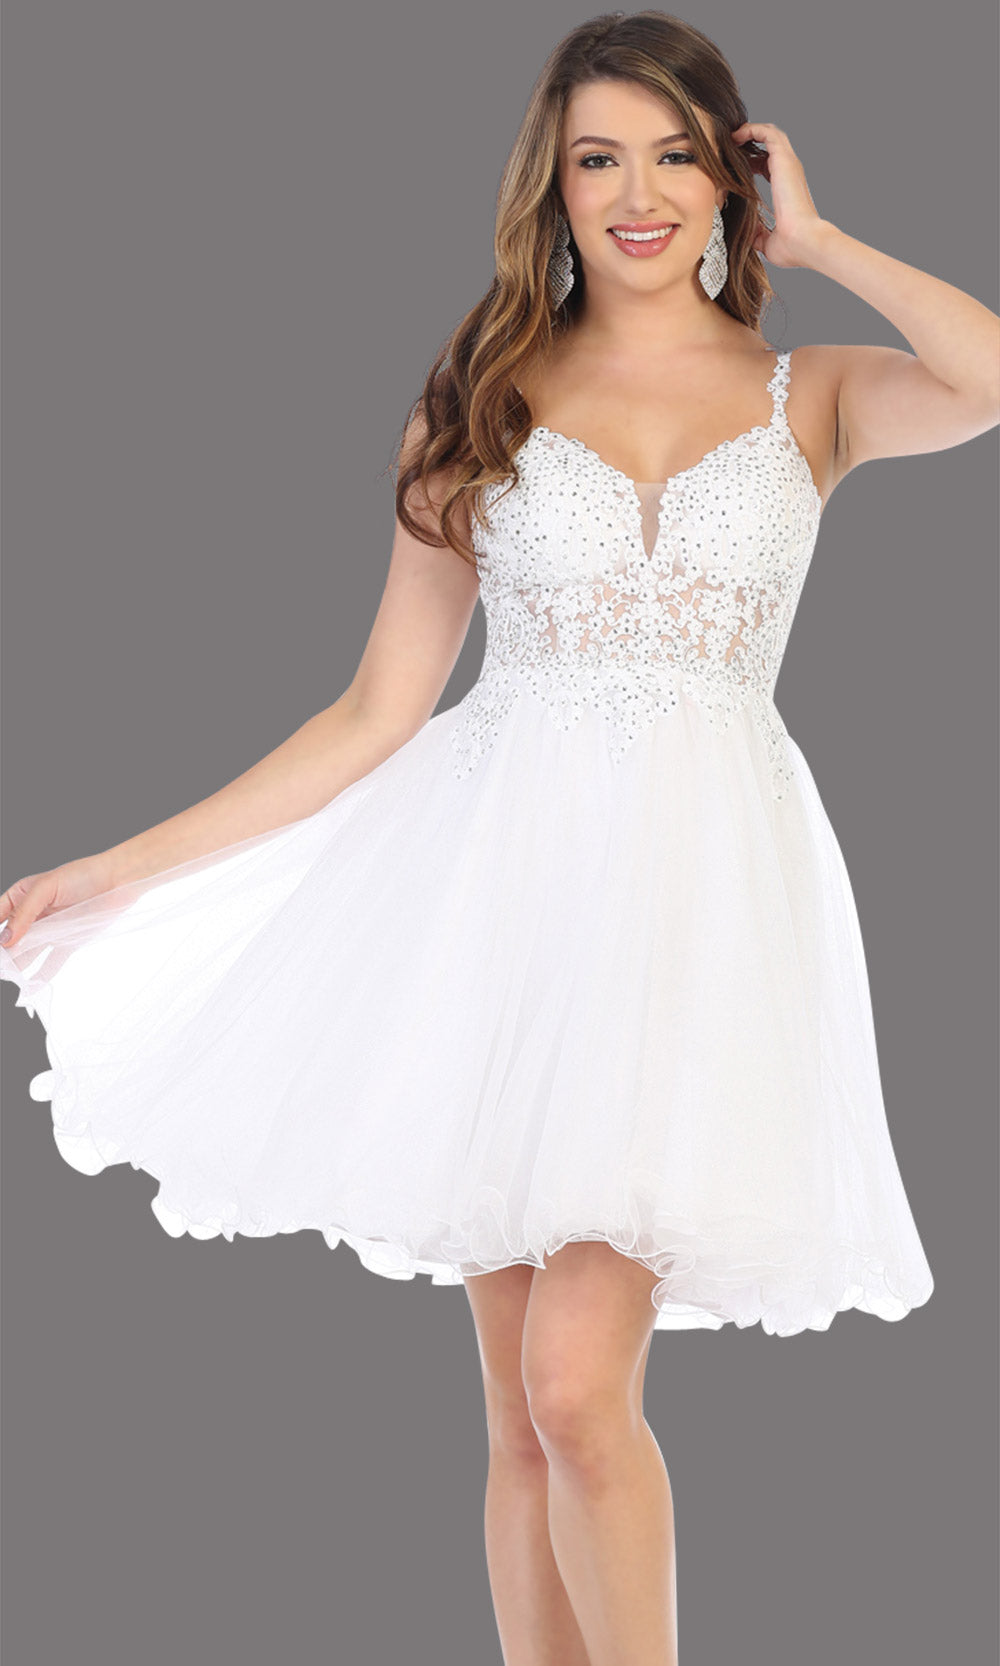 Mayqueen Mq1693 short white flowy v neck beaded sequin grade 8 graduation dress w/straps & puffy skirt. This white party dress is perfect for prom, graduation, grade 8 grad, confirmation dress, bat mitzvah dress, damas. Plus sizes avail.jpggrade 8 grad dresses, graduation dresses